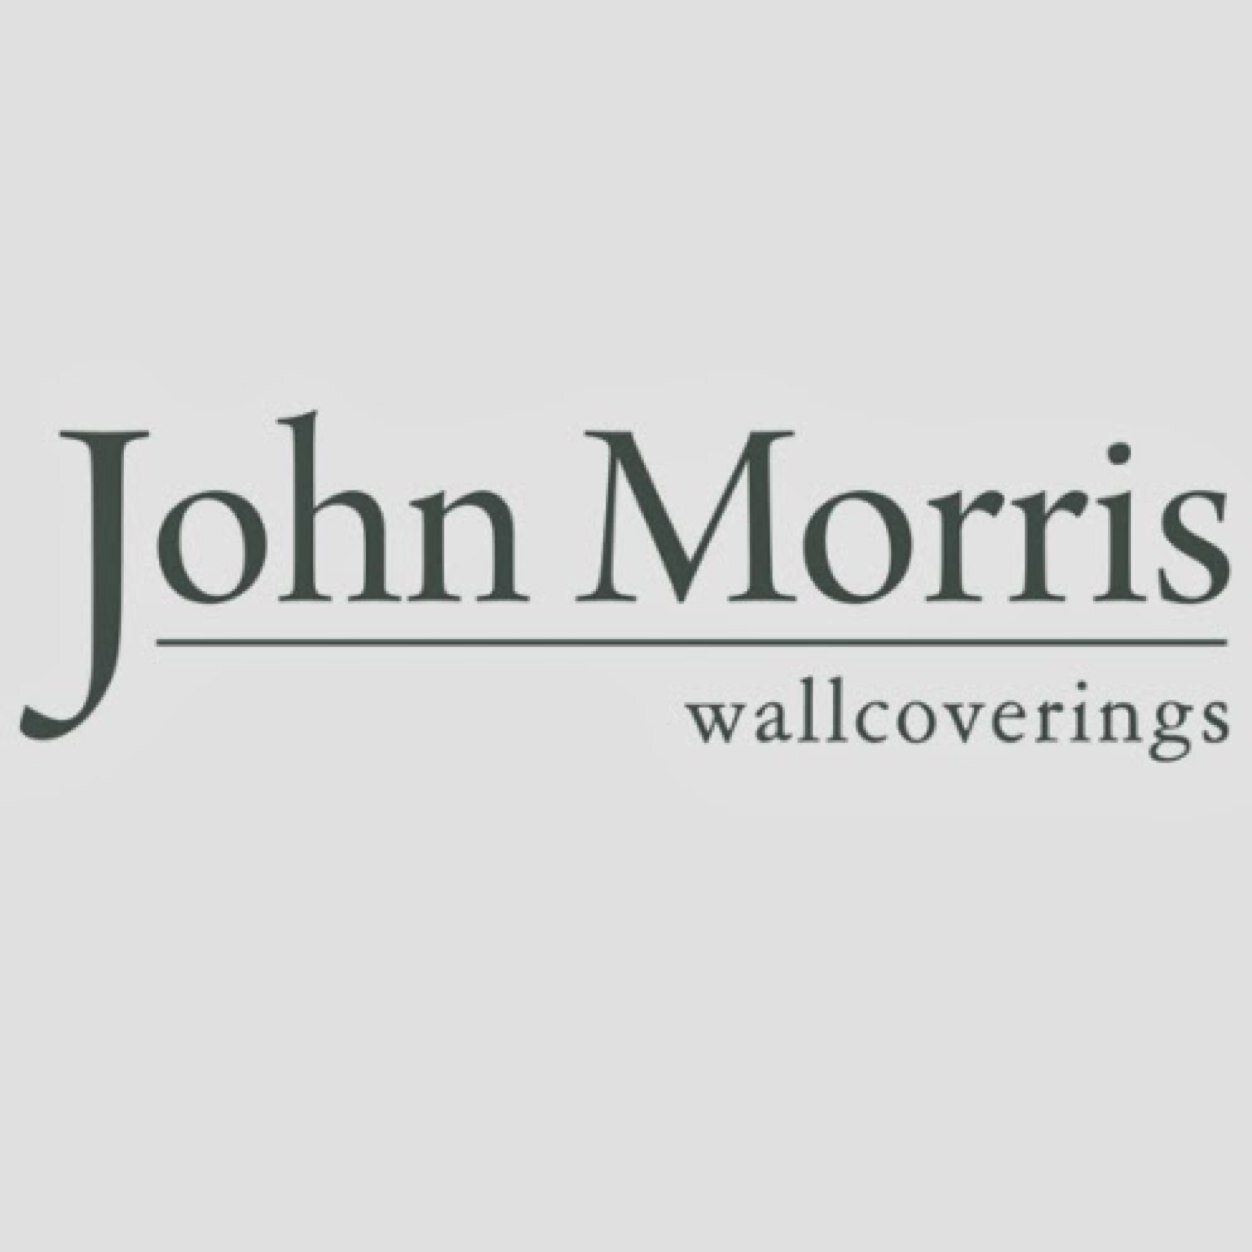 Manufacturers of luxury wallcoverings, named after the company’s founder 'John Morris' who hand built the first printing machines in 1967.